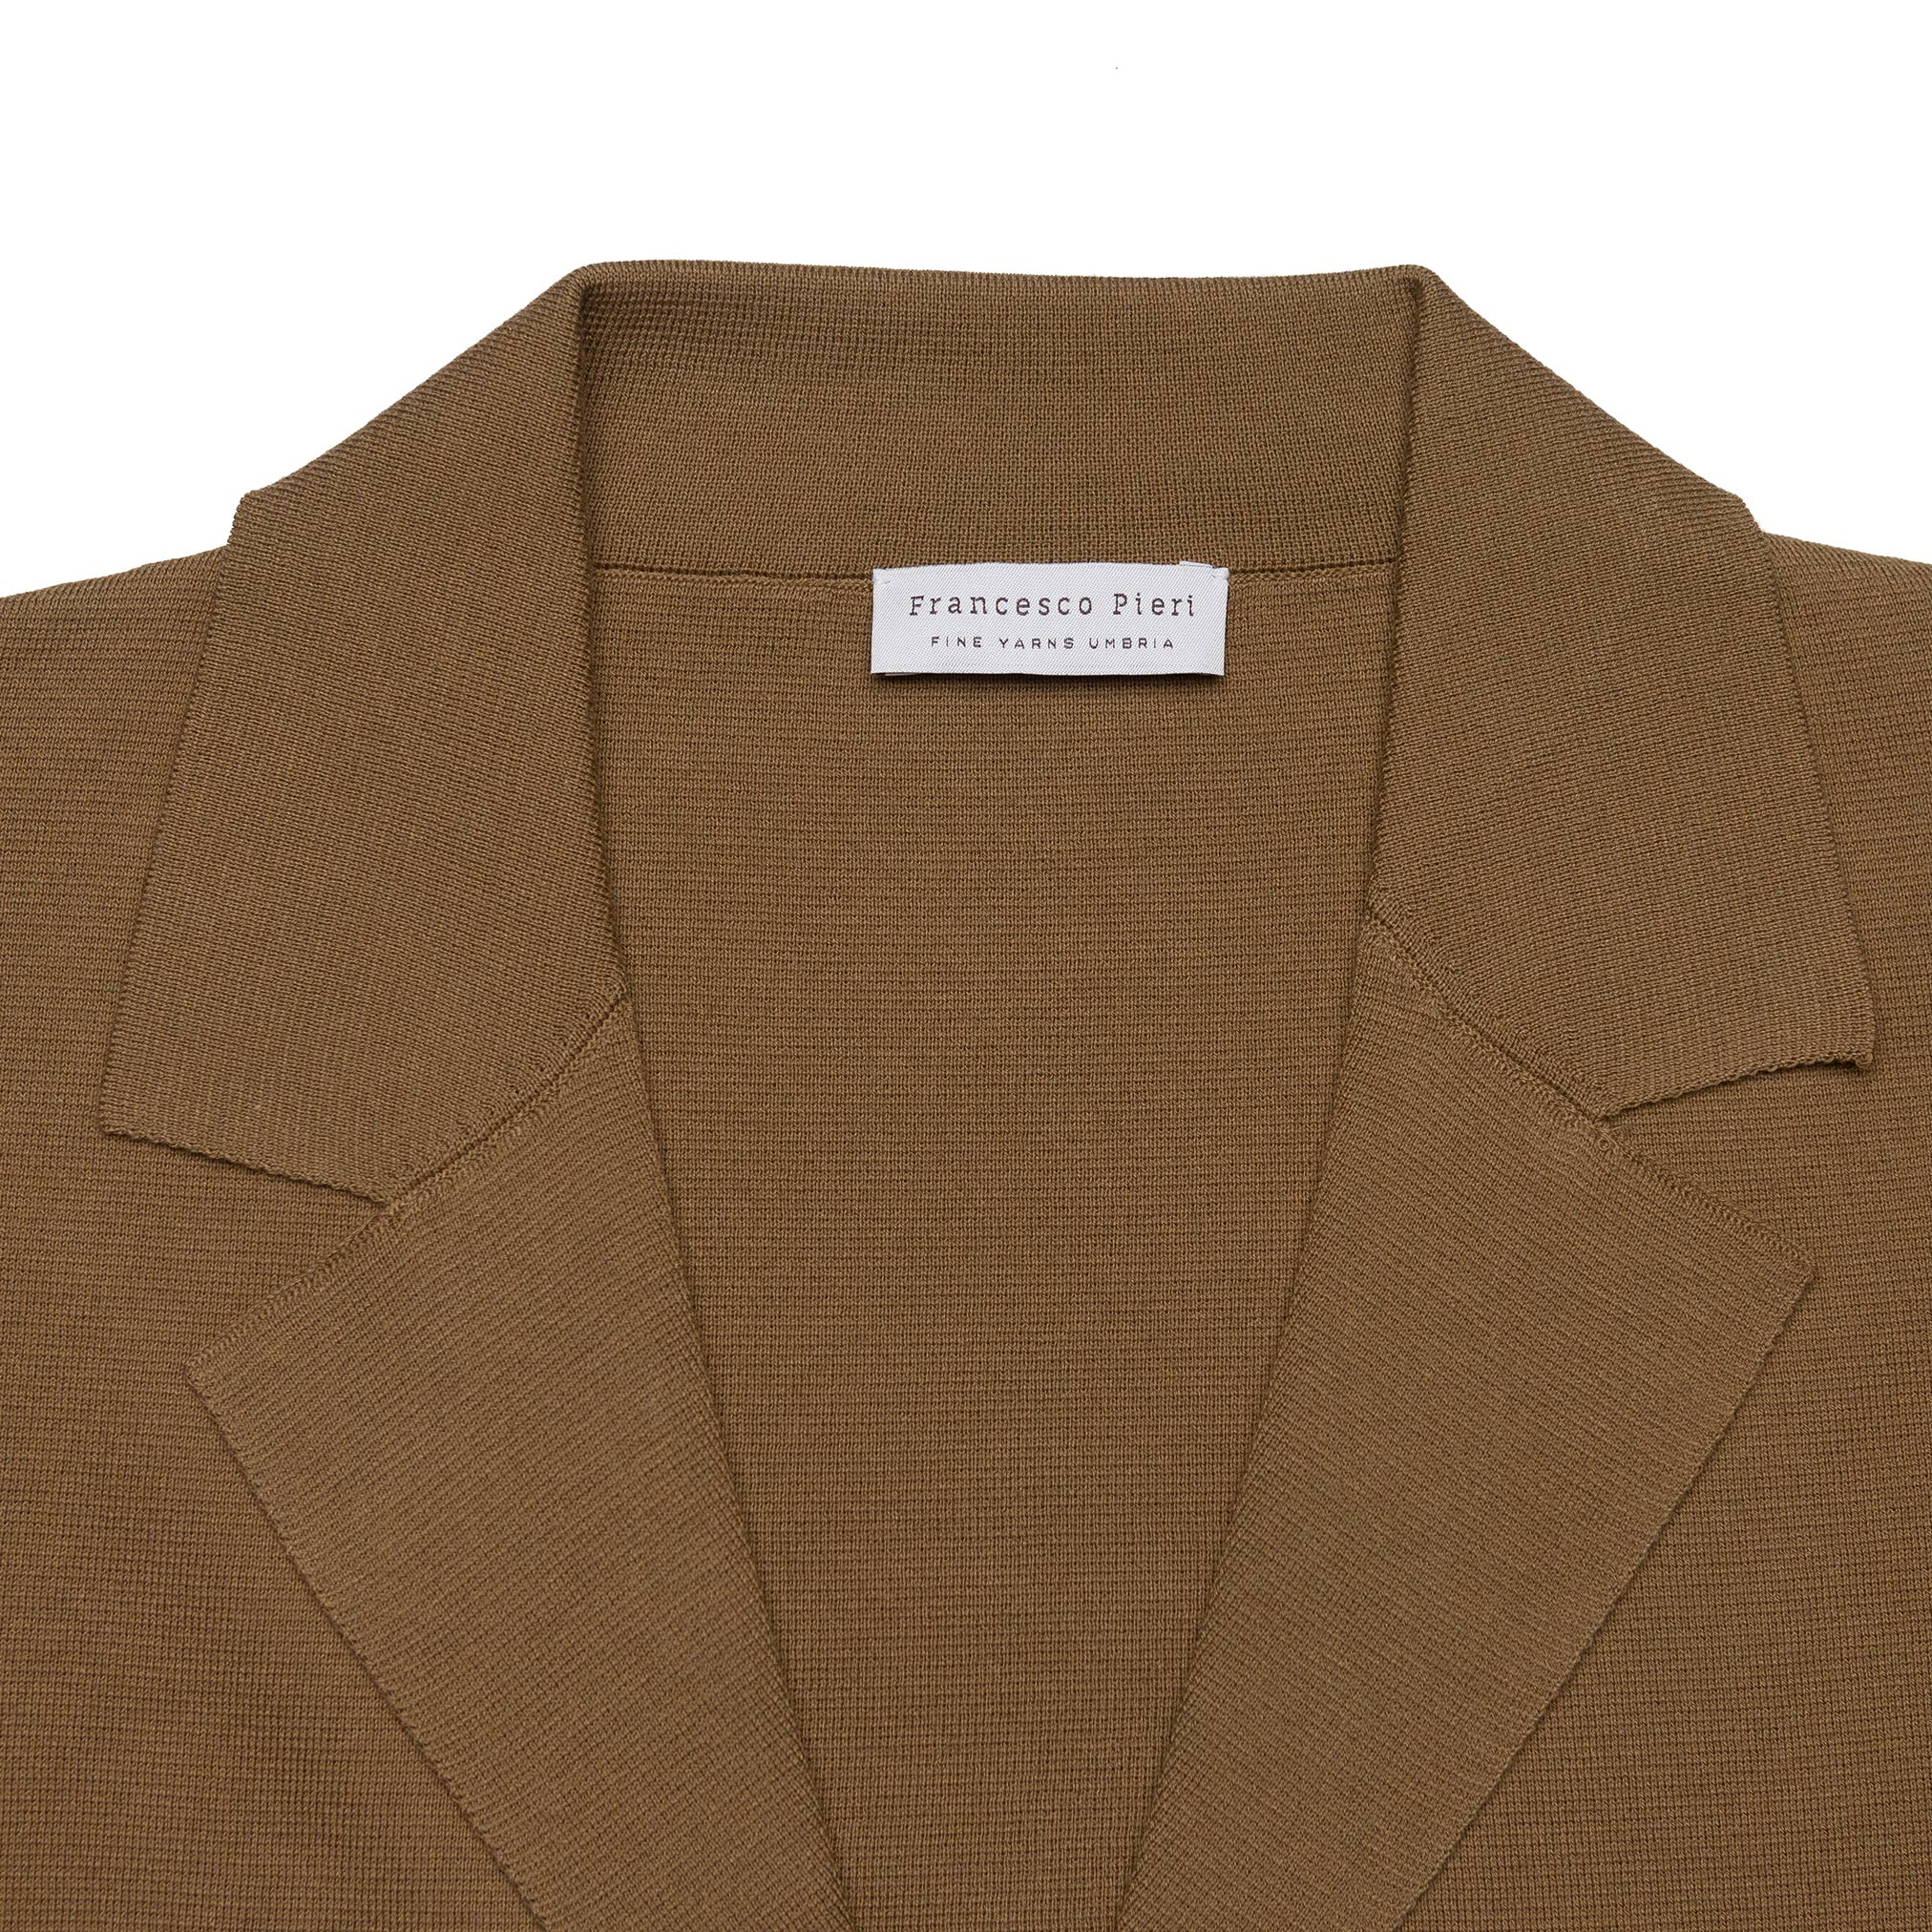 Jacket in Tan Cotton